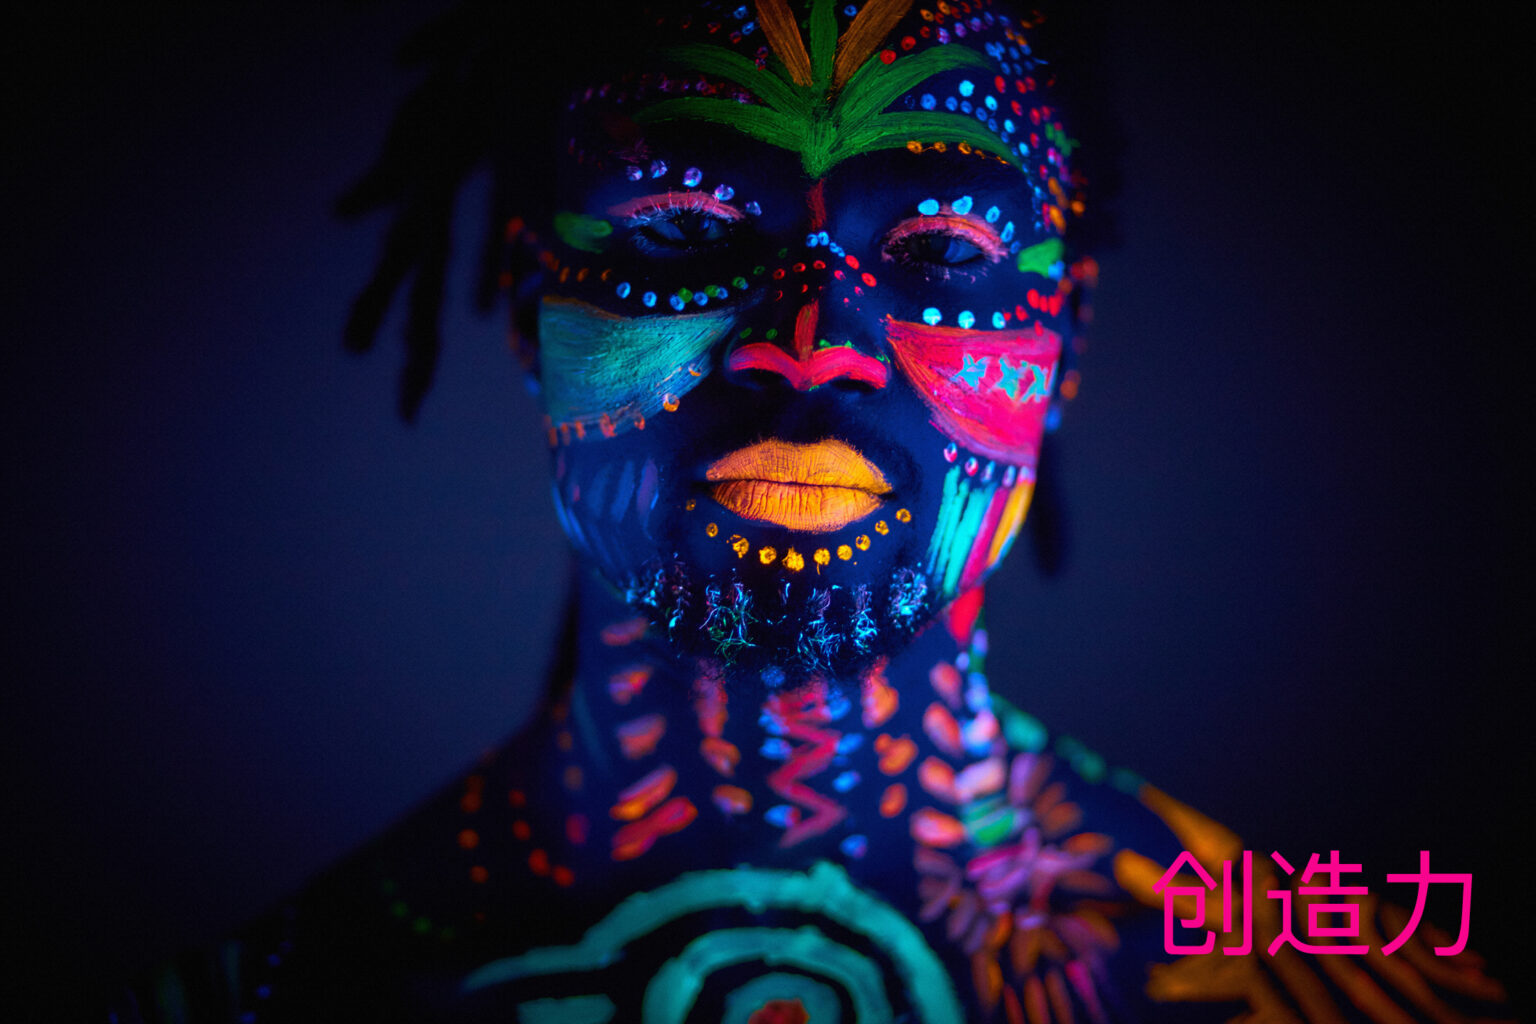 Granite Bay Graphic Design: Creativity: Image of a Man’s Face with Brightly Colored Face Paint in Black Light